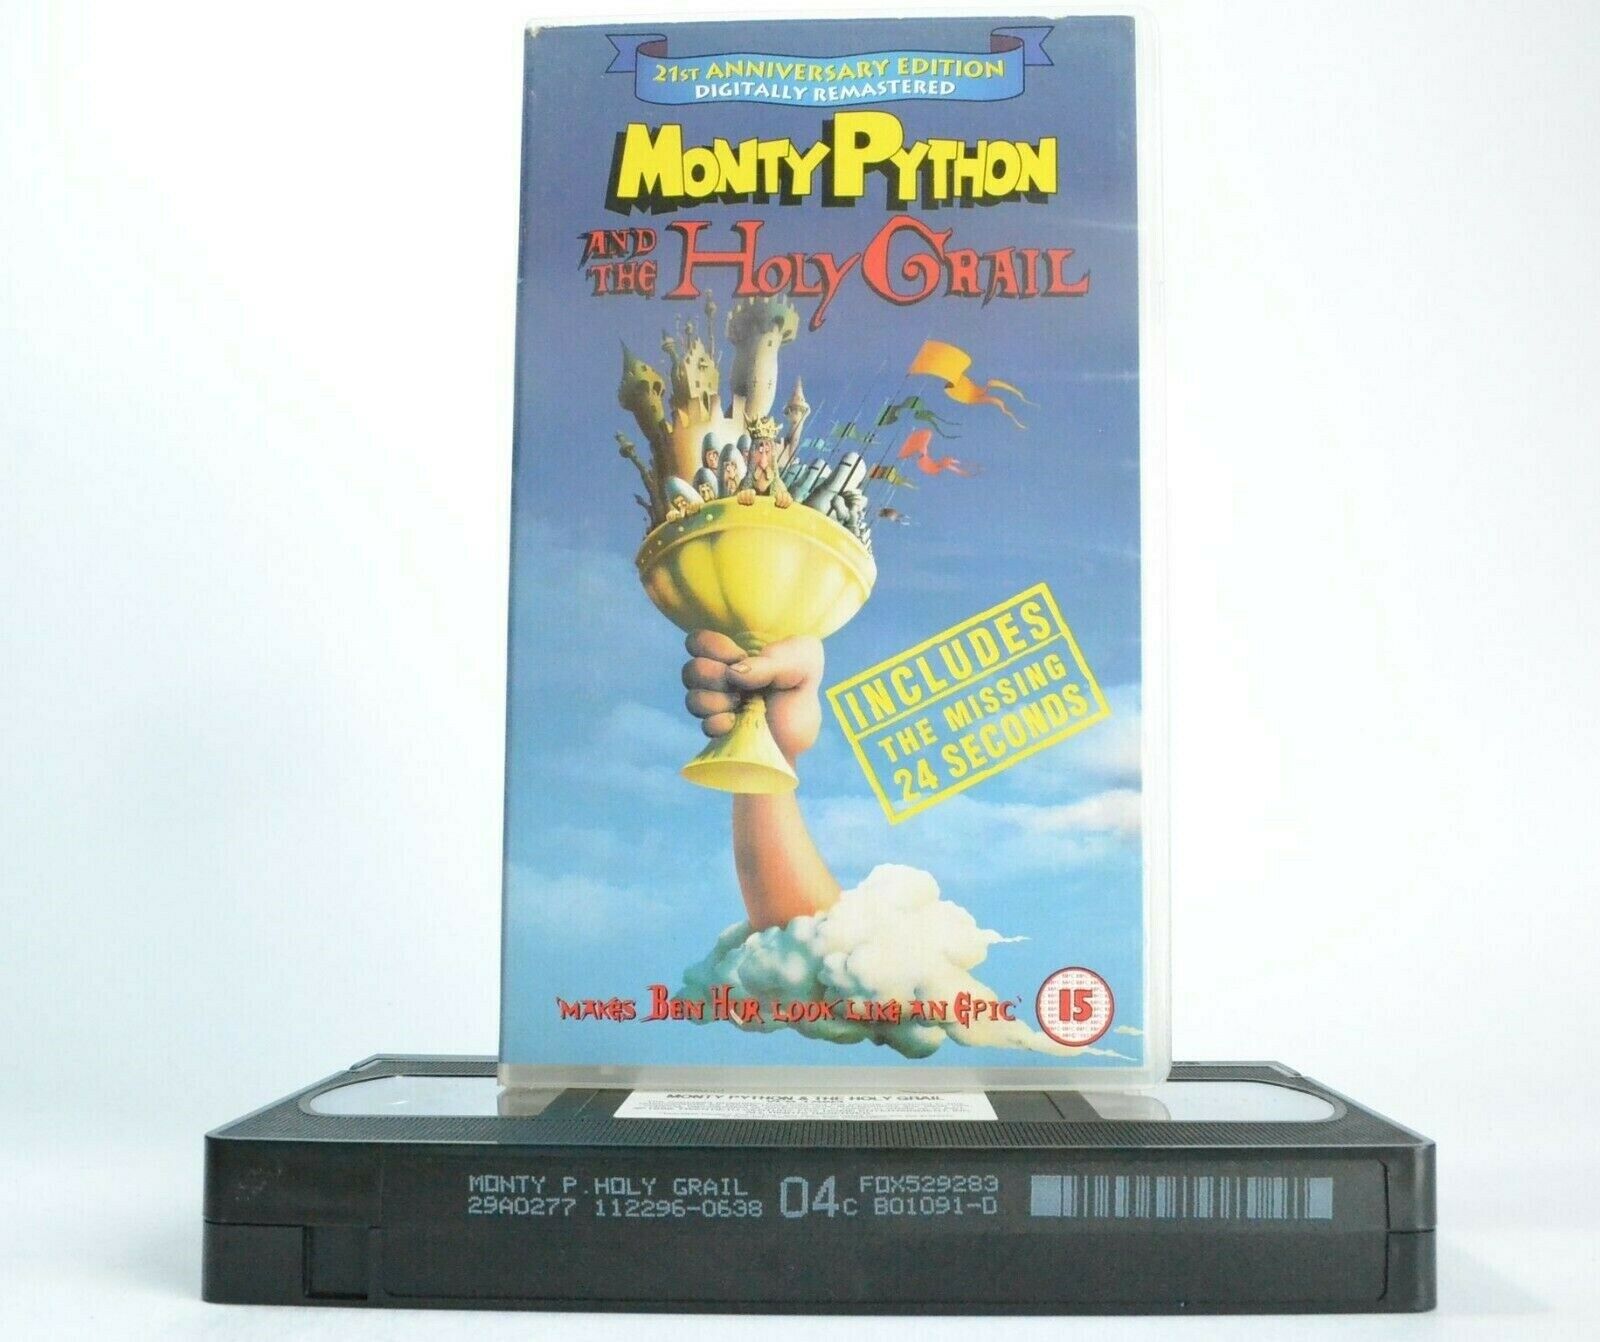 Monty Python And The Holy Grail: 21st Anniversary Edition - British Comedy - VHS-